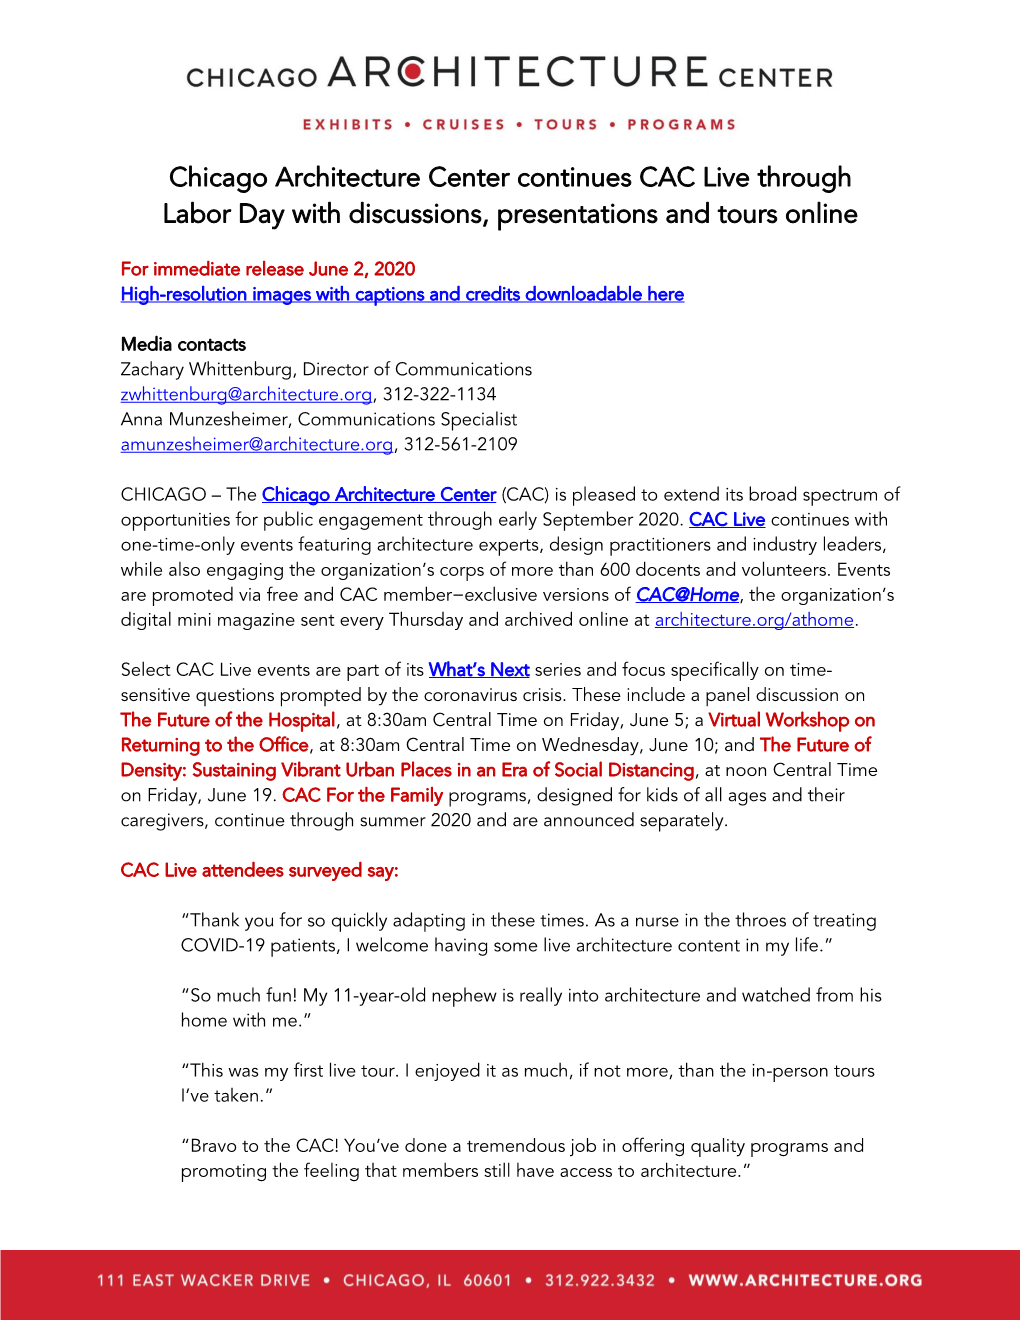 Chicago Architecture Center Continues CAC Live Through Labor Day with Discussions, Presentations and Tours Online